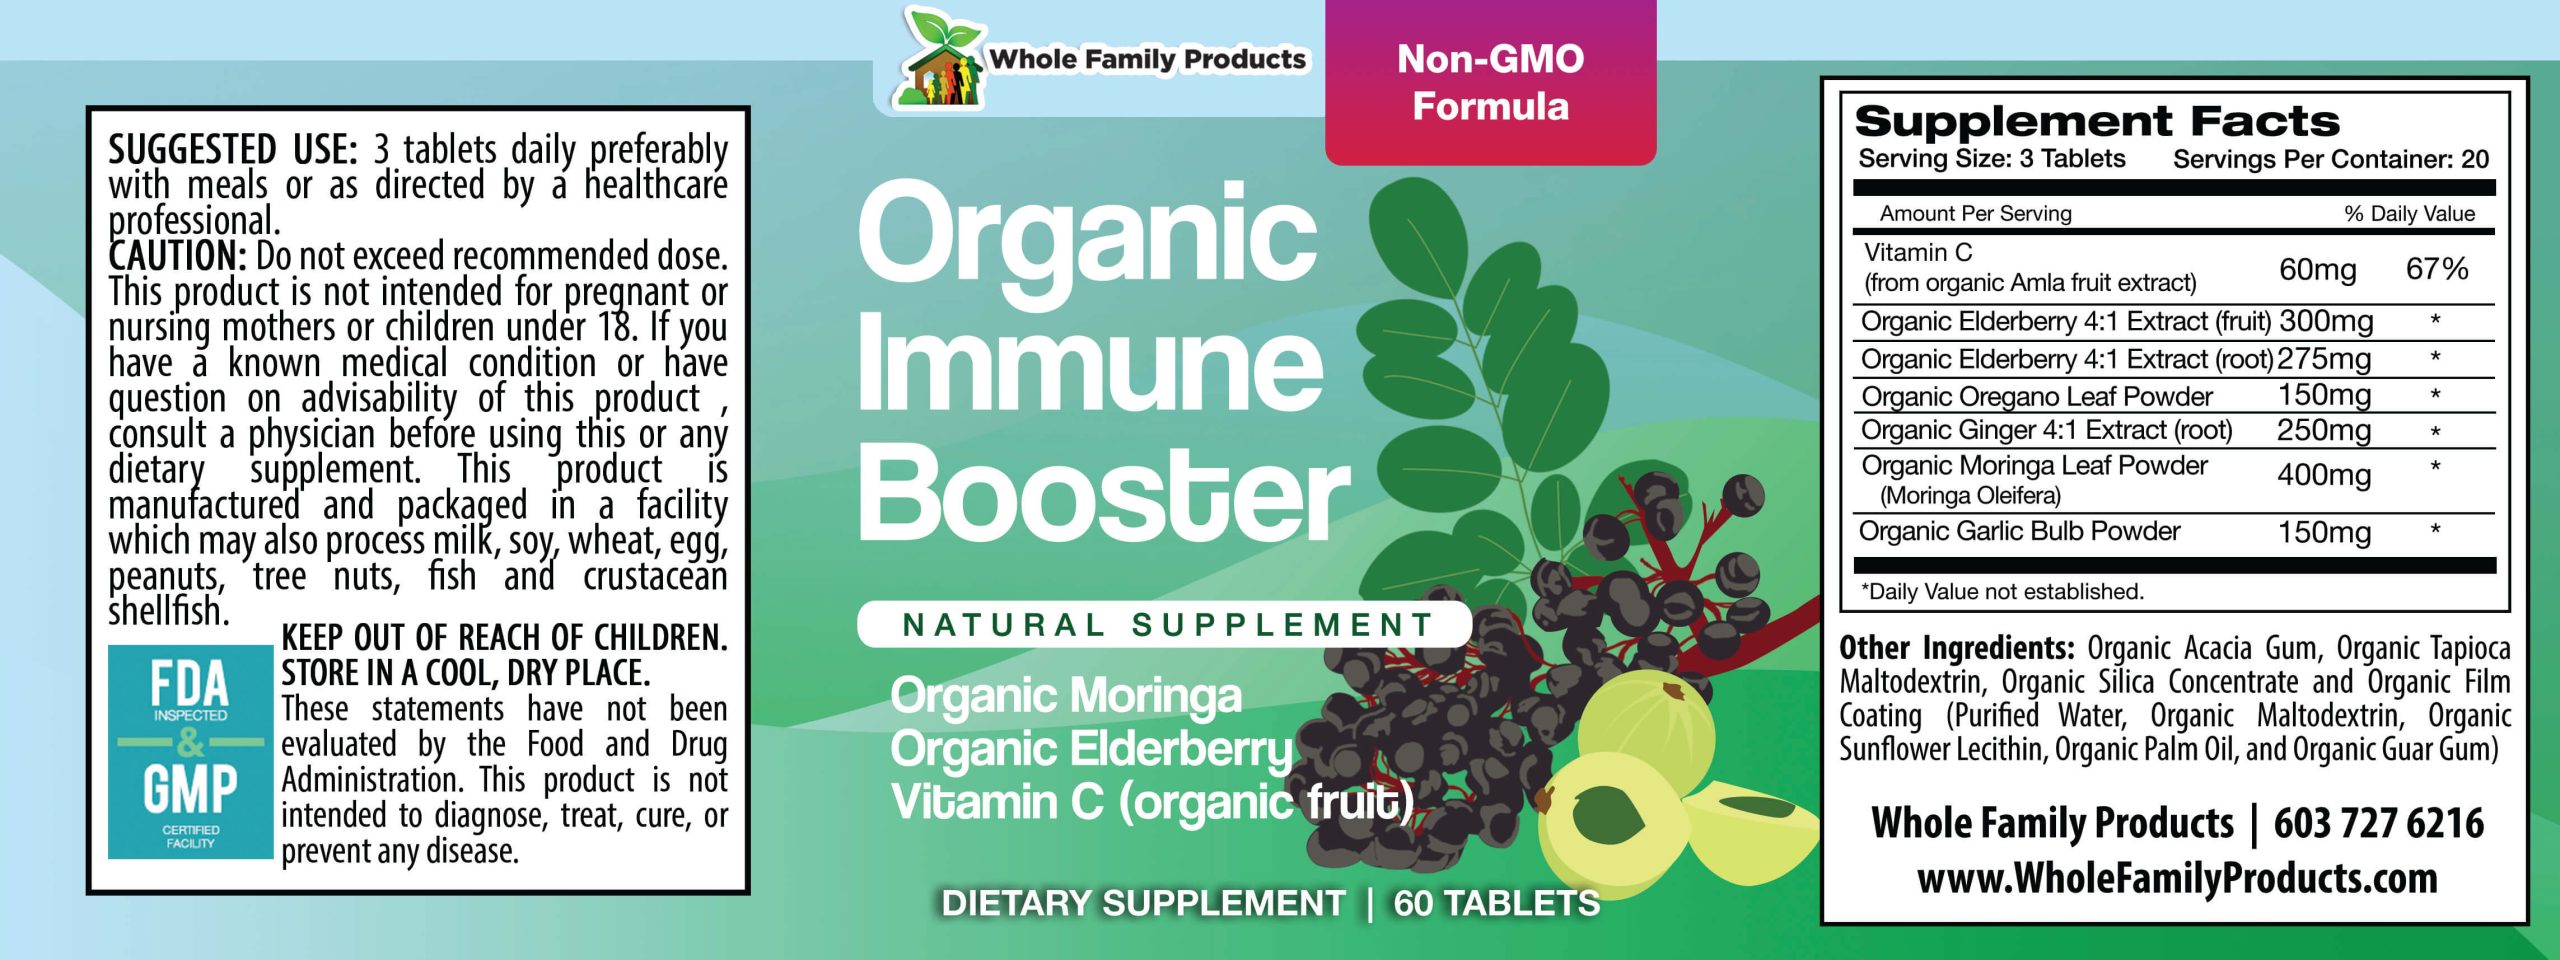 Organic Immune Booster Product Label